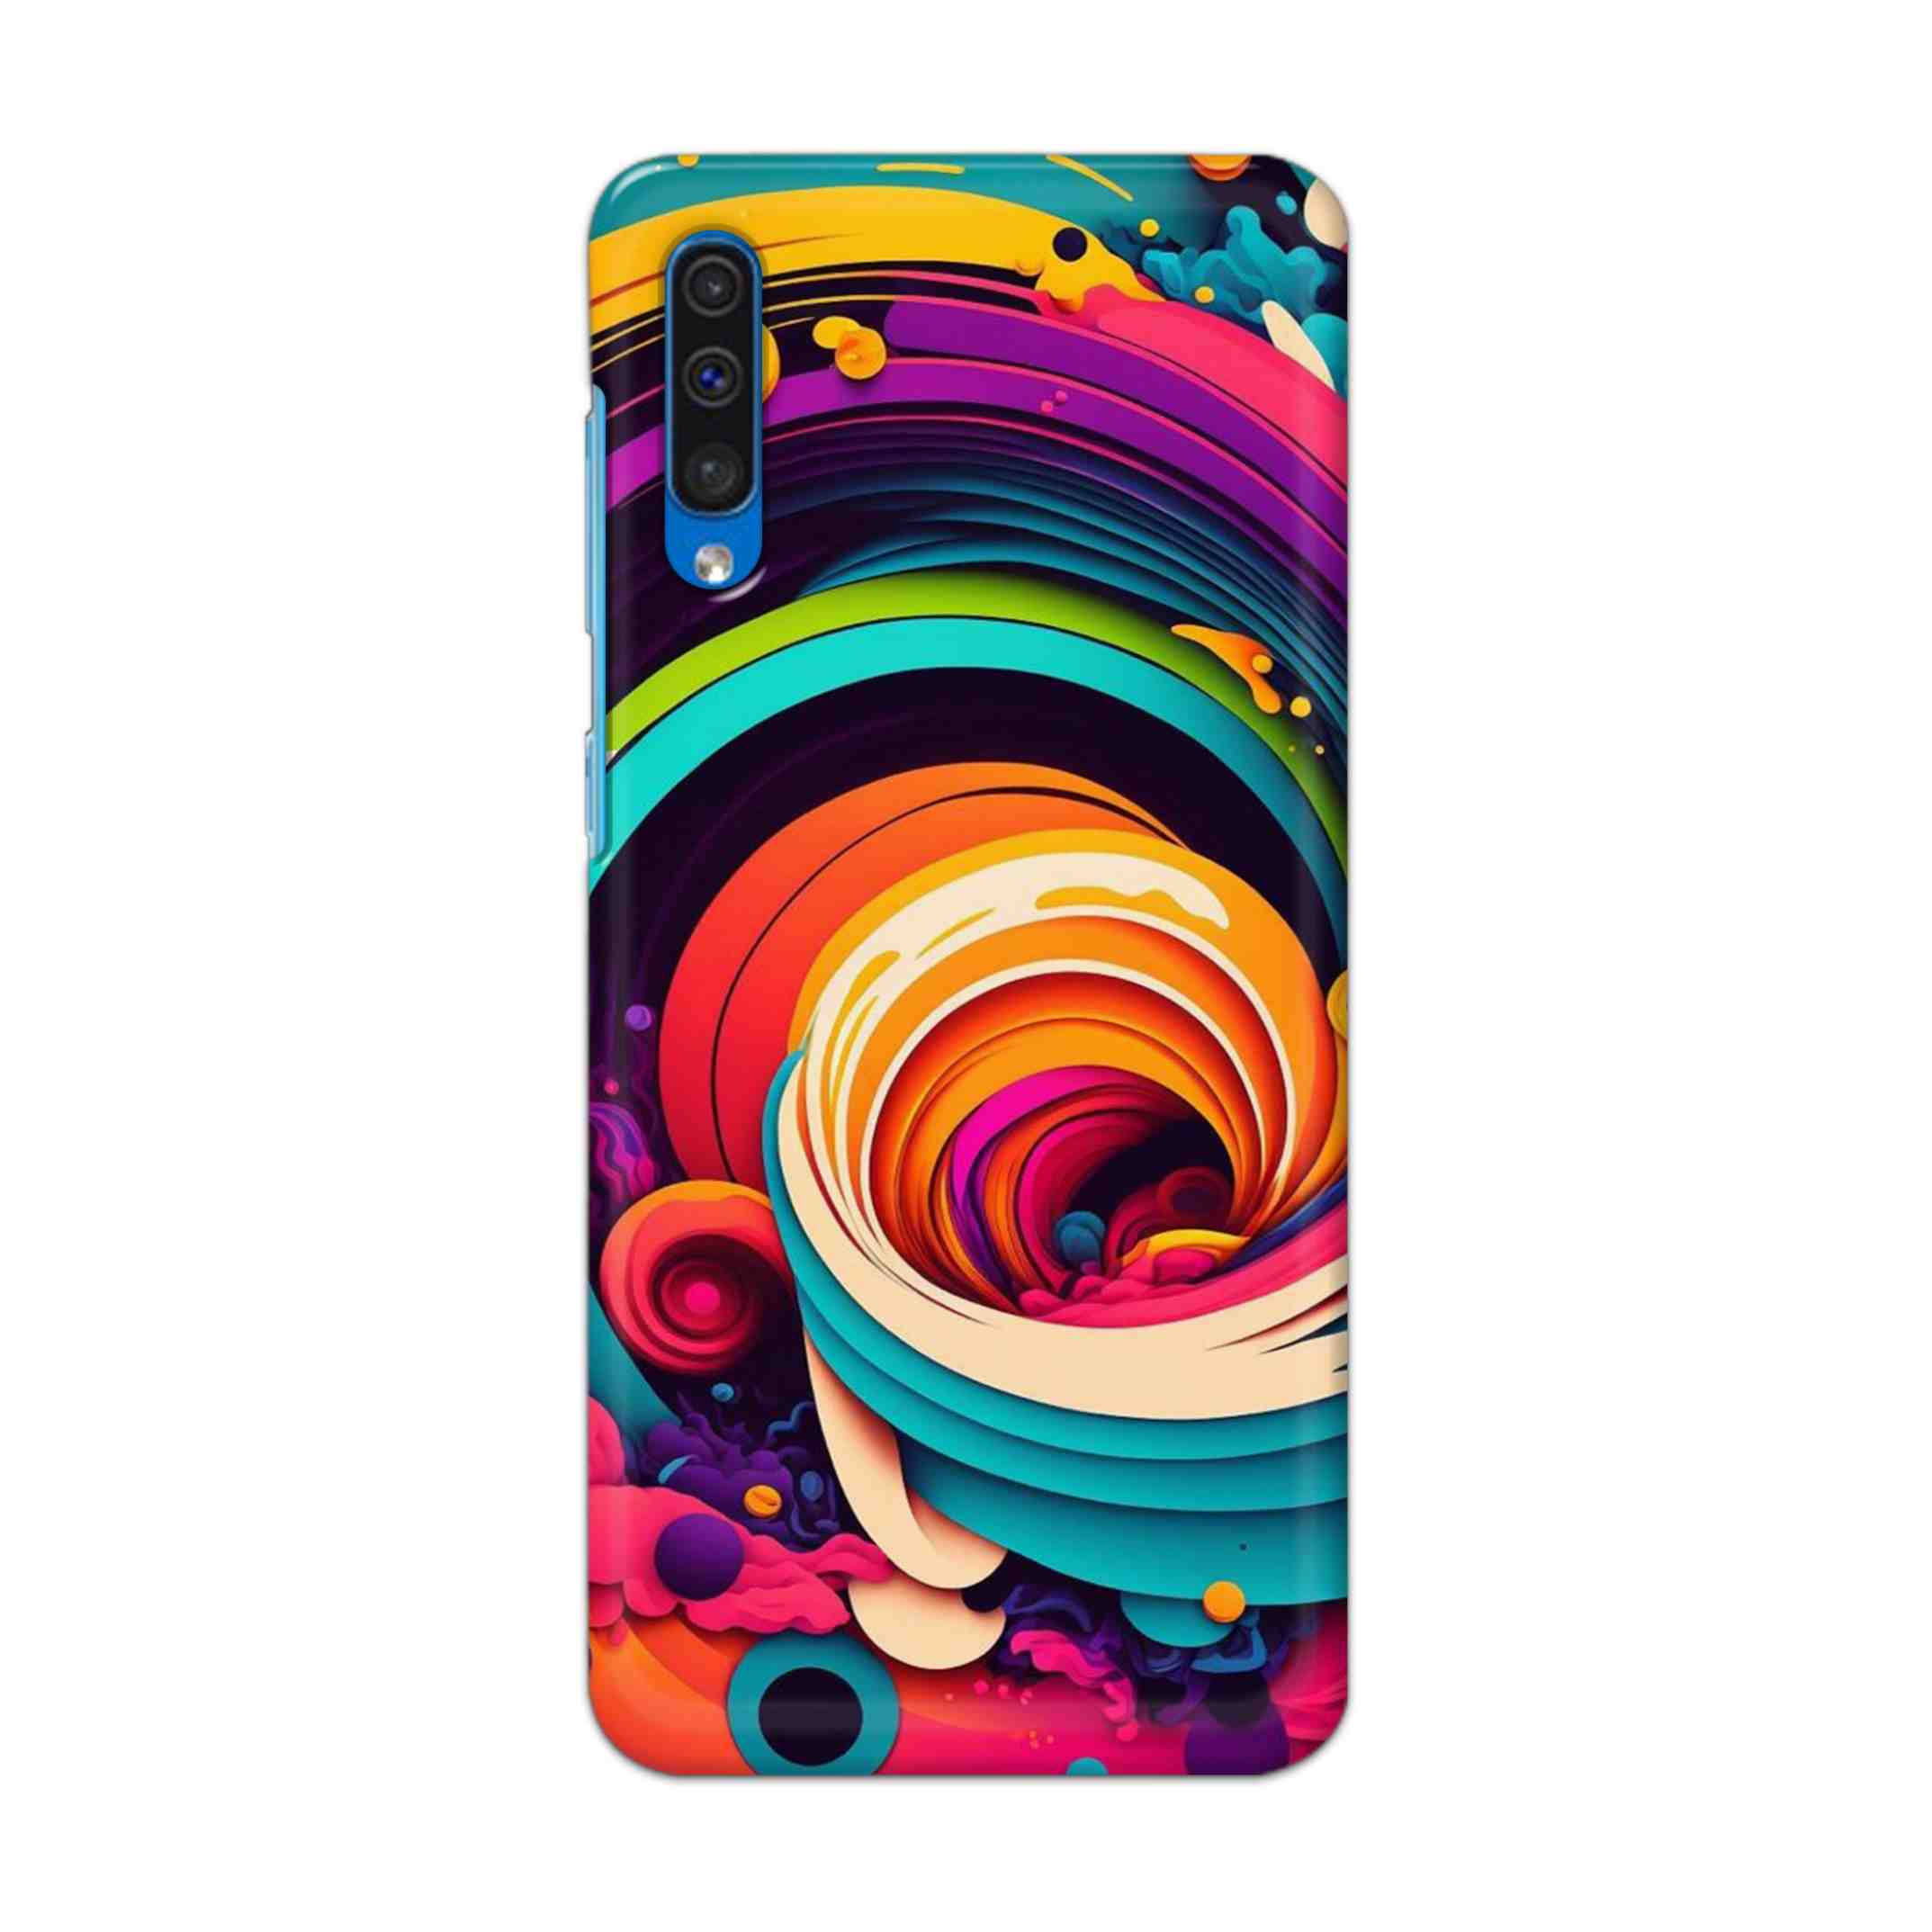 Buy Colour Circle Hard Back Mobile Phone Case Cover For Samsung Galaxy A50 / A50s / A30s Online